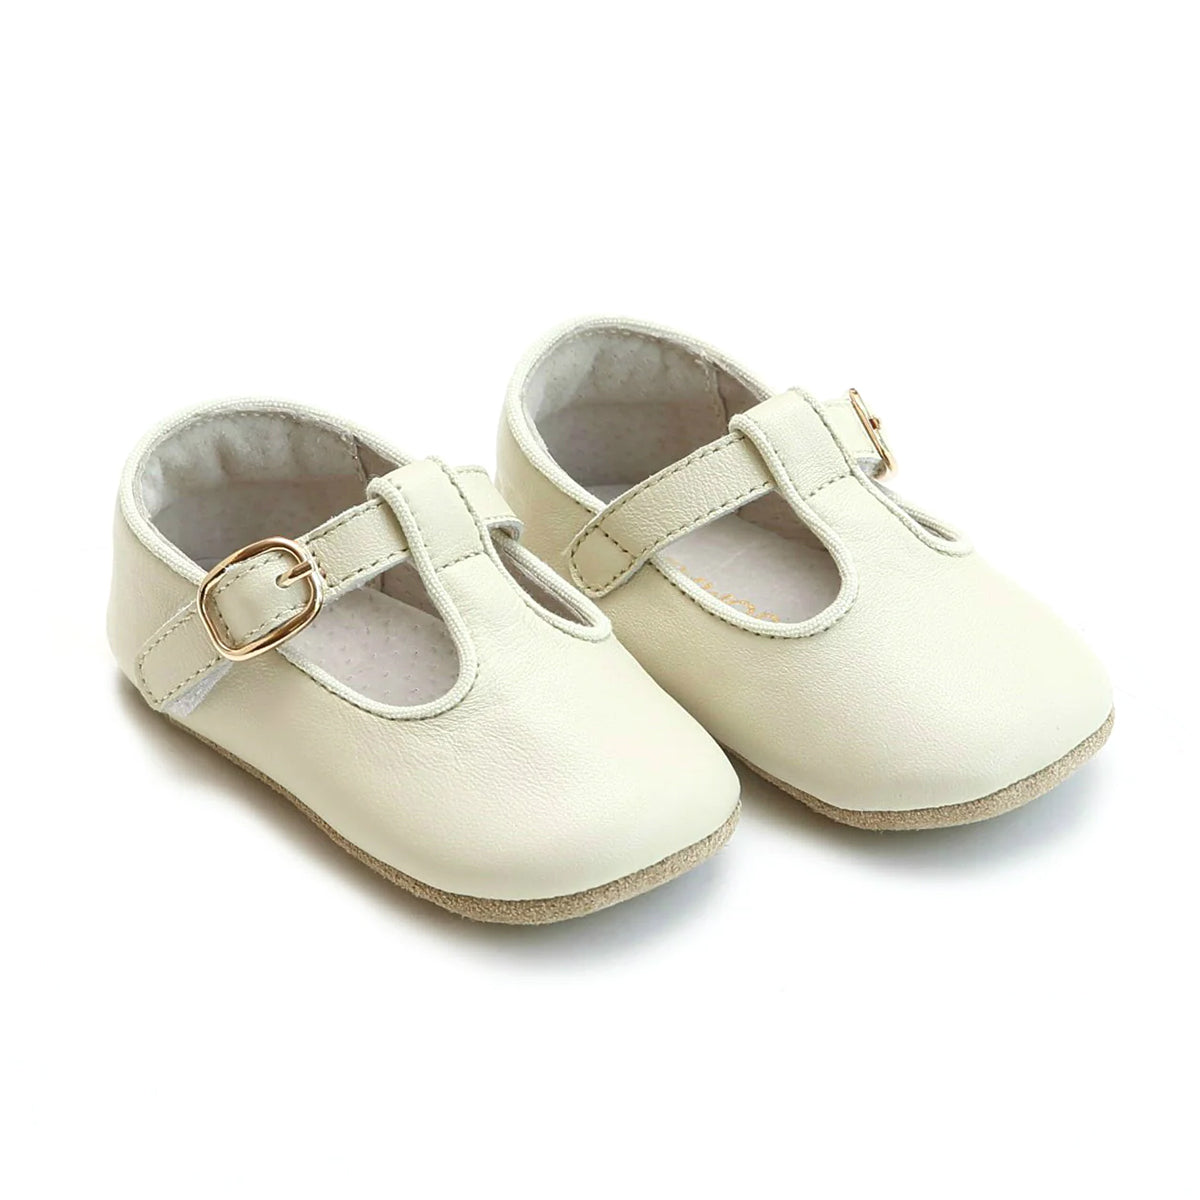 Lamour Baby Girl's Beige Evie Mary Jane Shoes